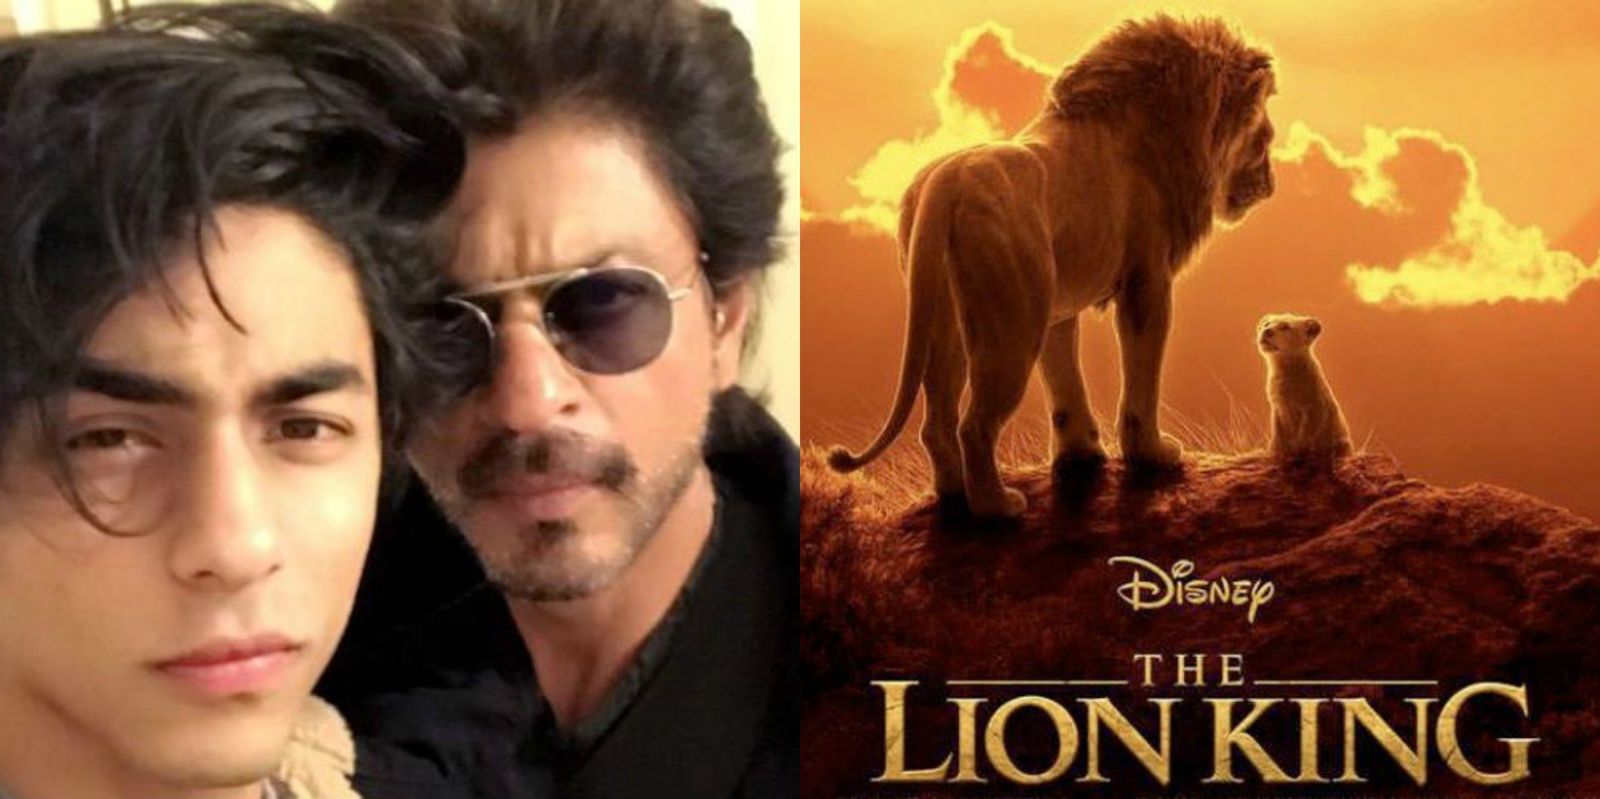 Shah Rukh Khan And Son Aryan Will Give Voice To Mufasa And Simba In The Lion King!